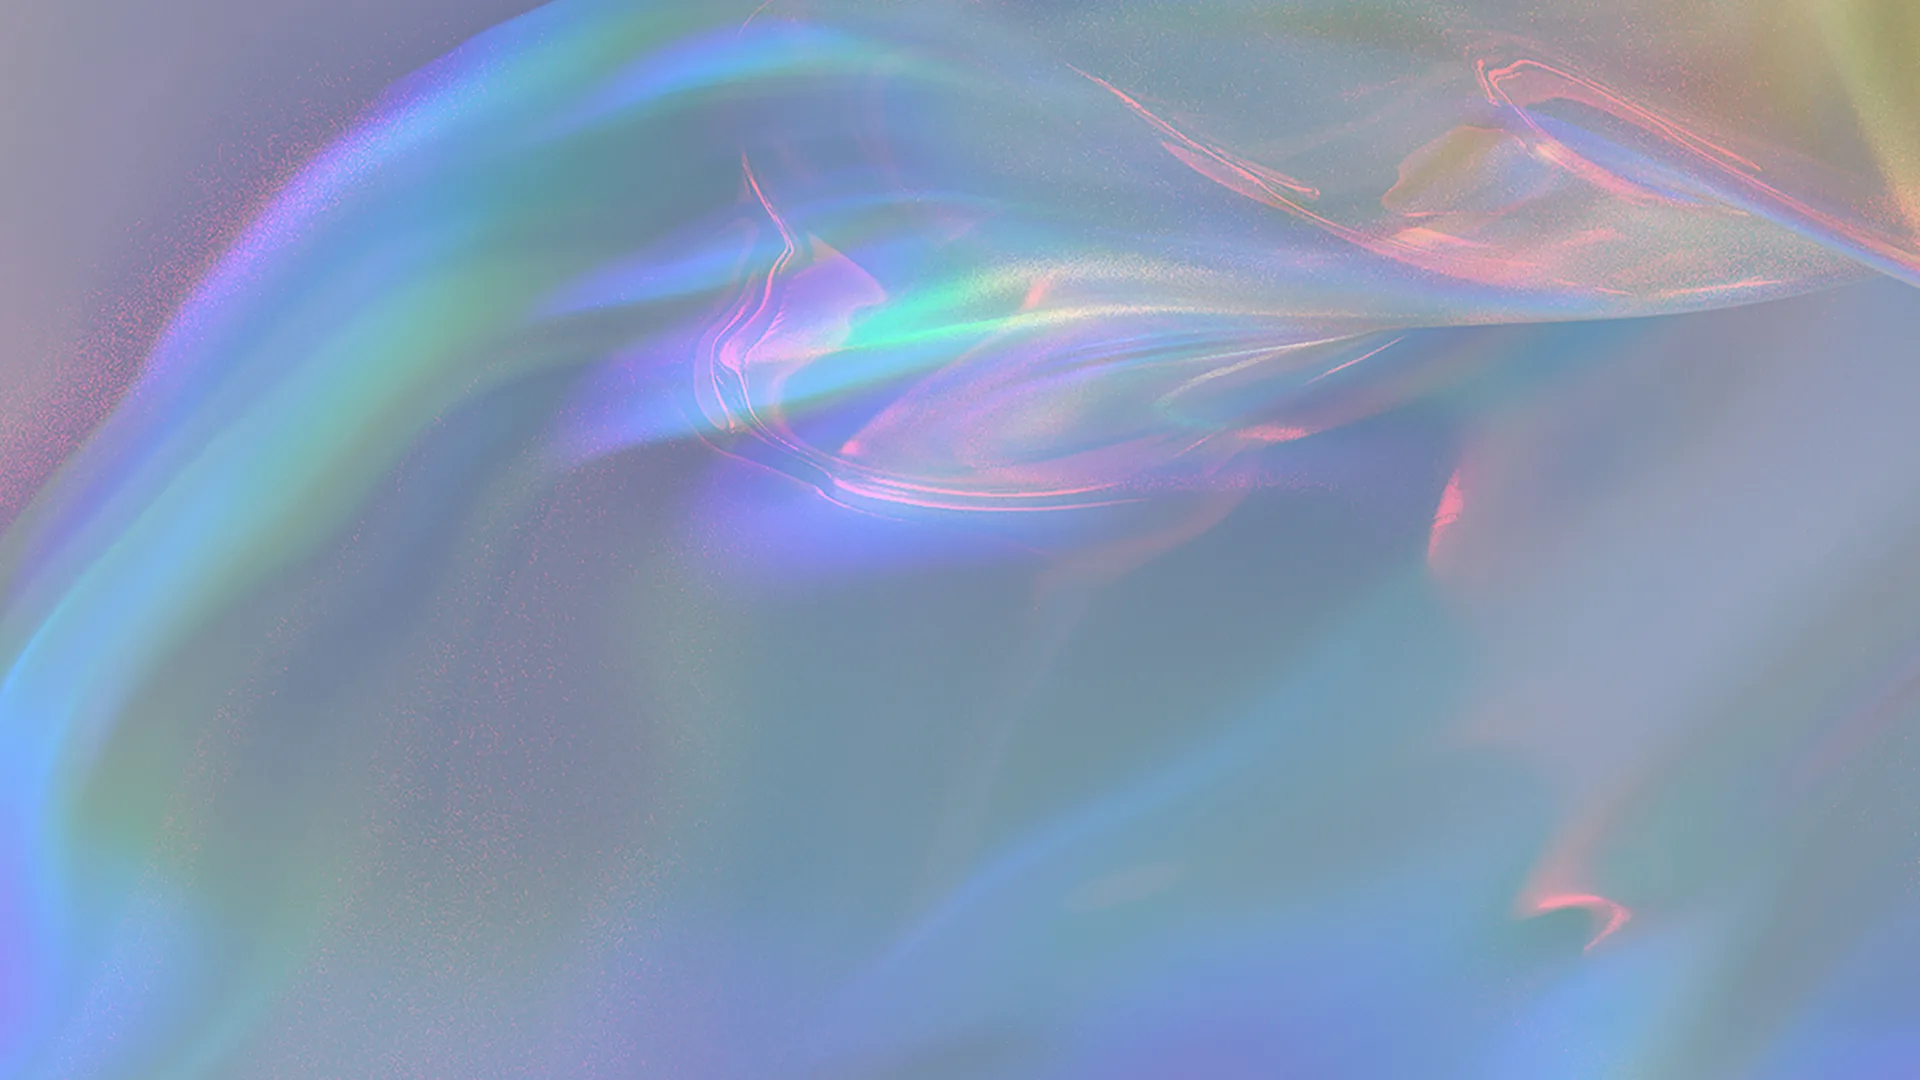 Abstract under water image with coloured lights